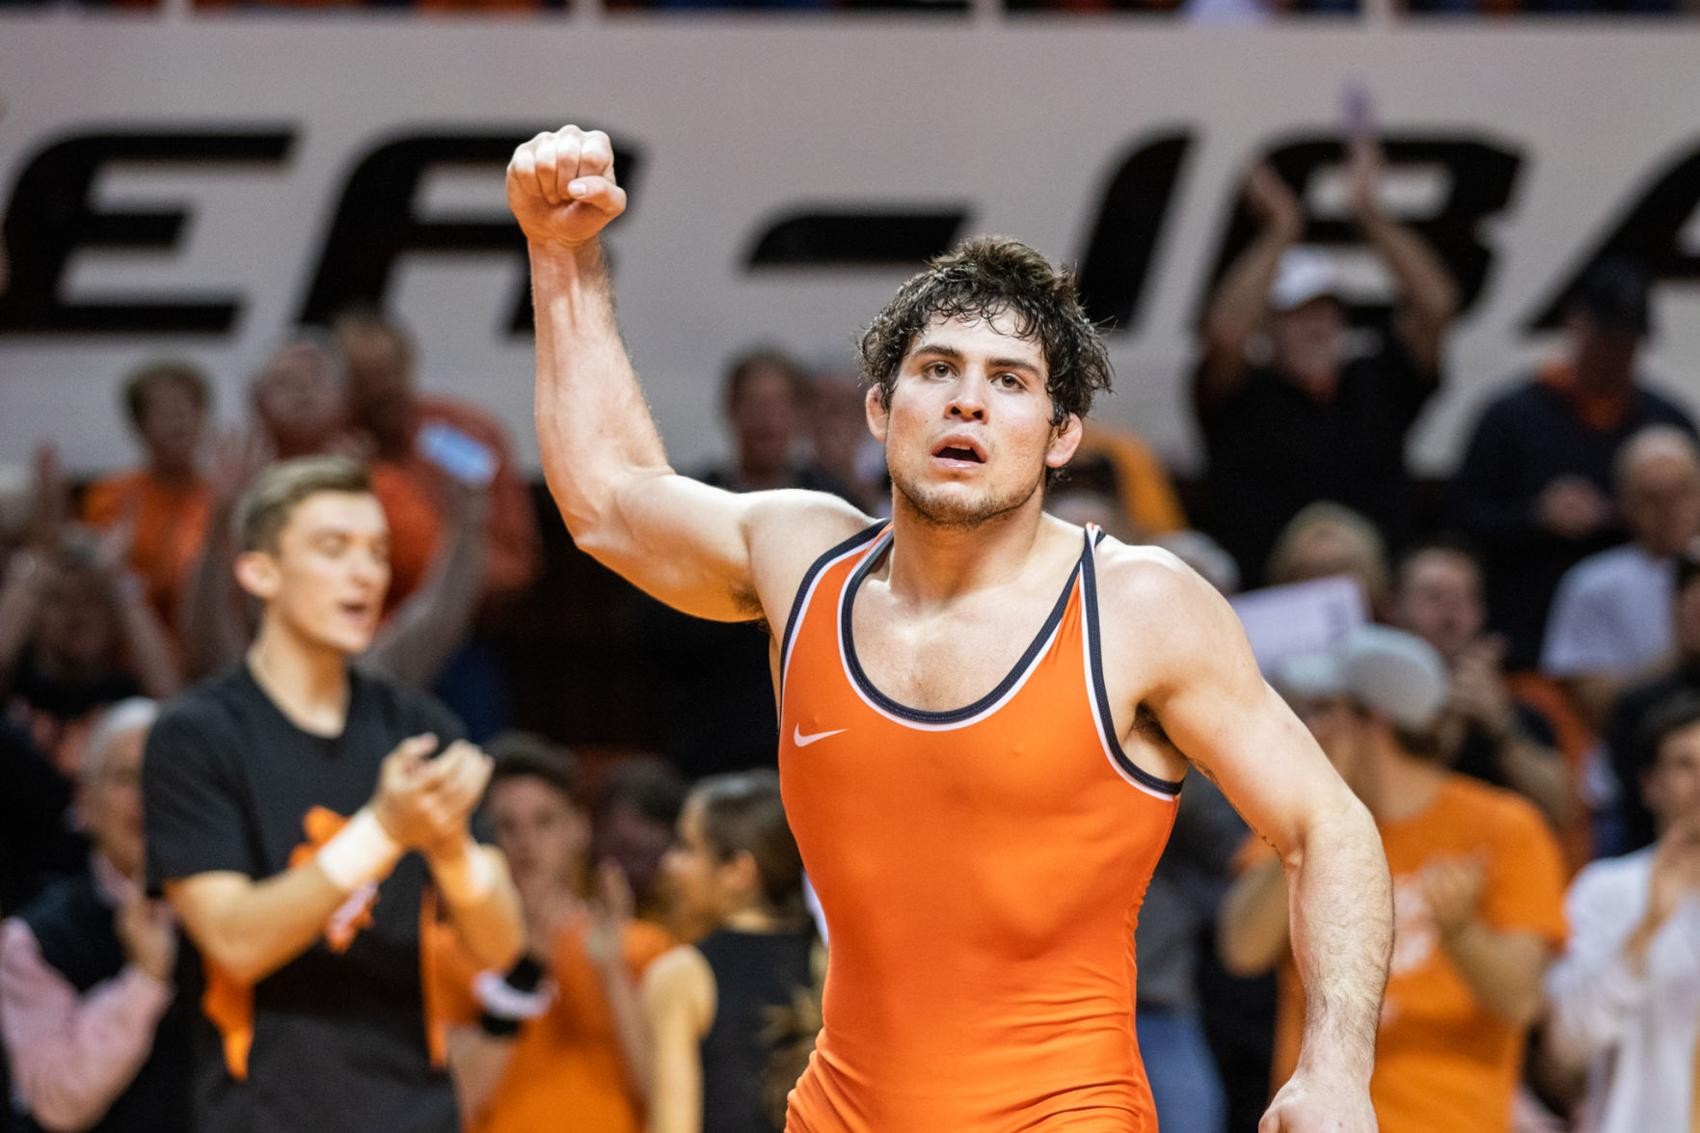 OSU Wrestling Sheets' sudden victory caps strong showing from Cowboys